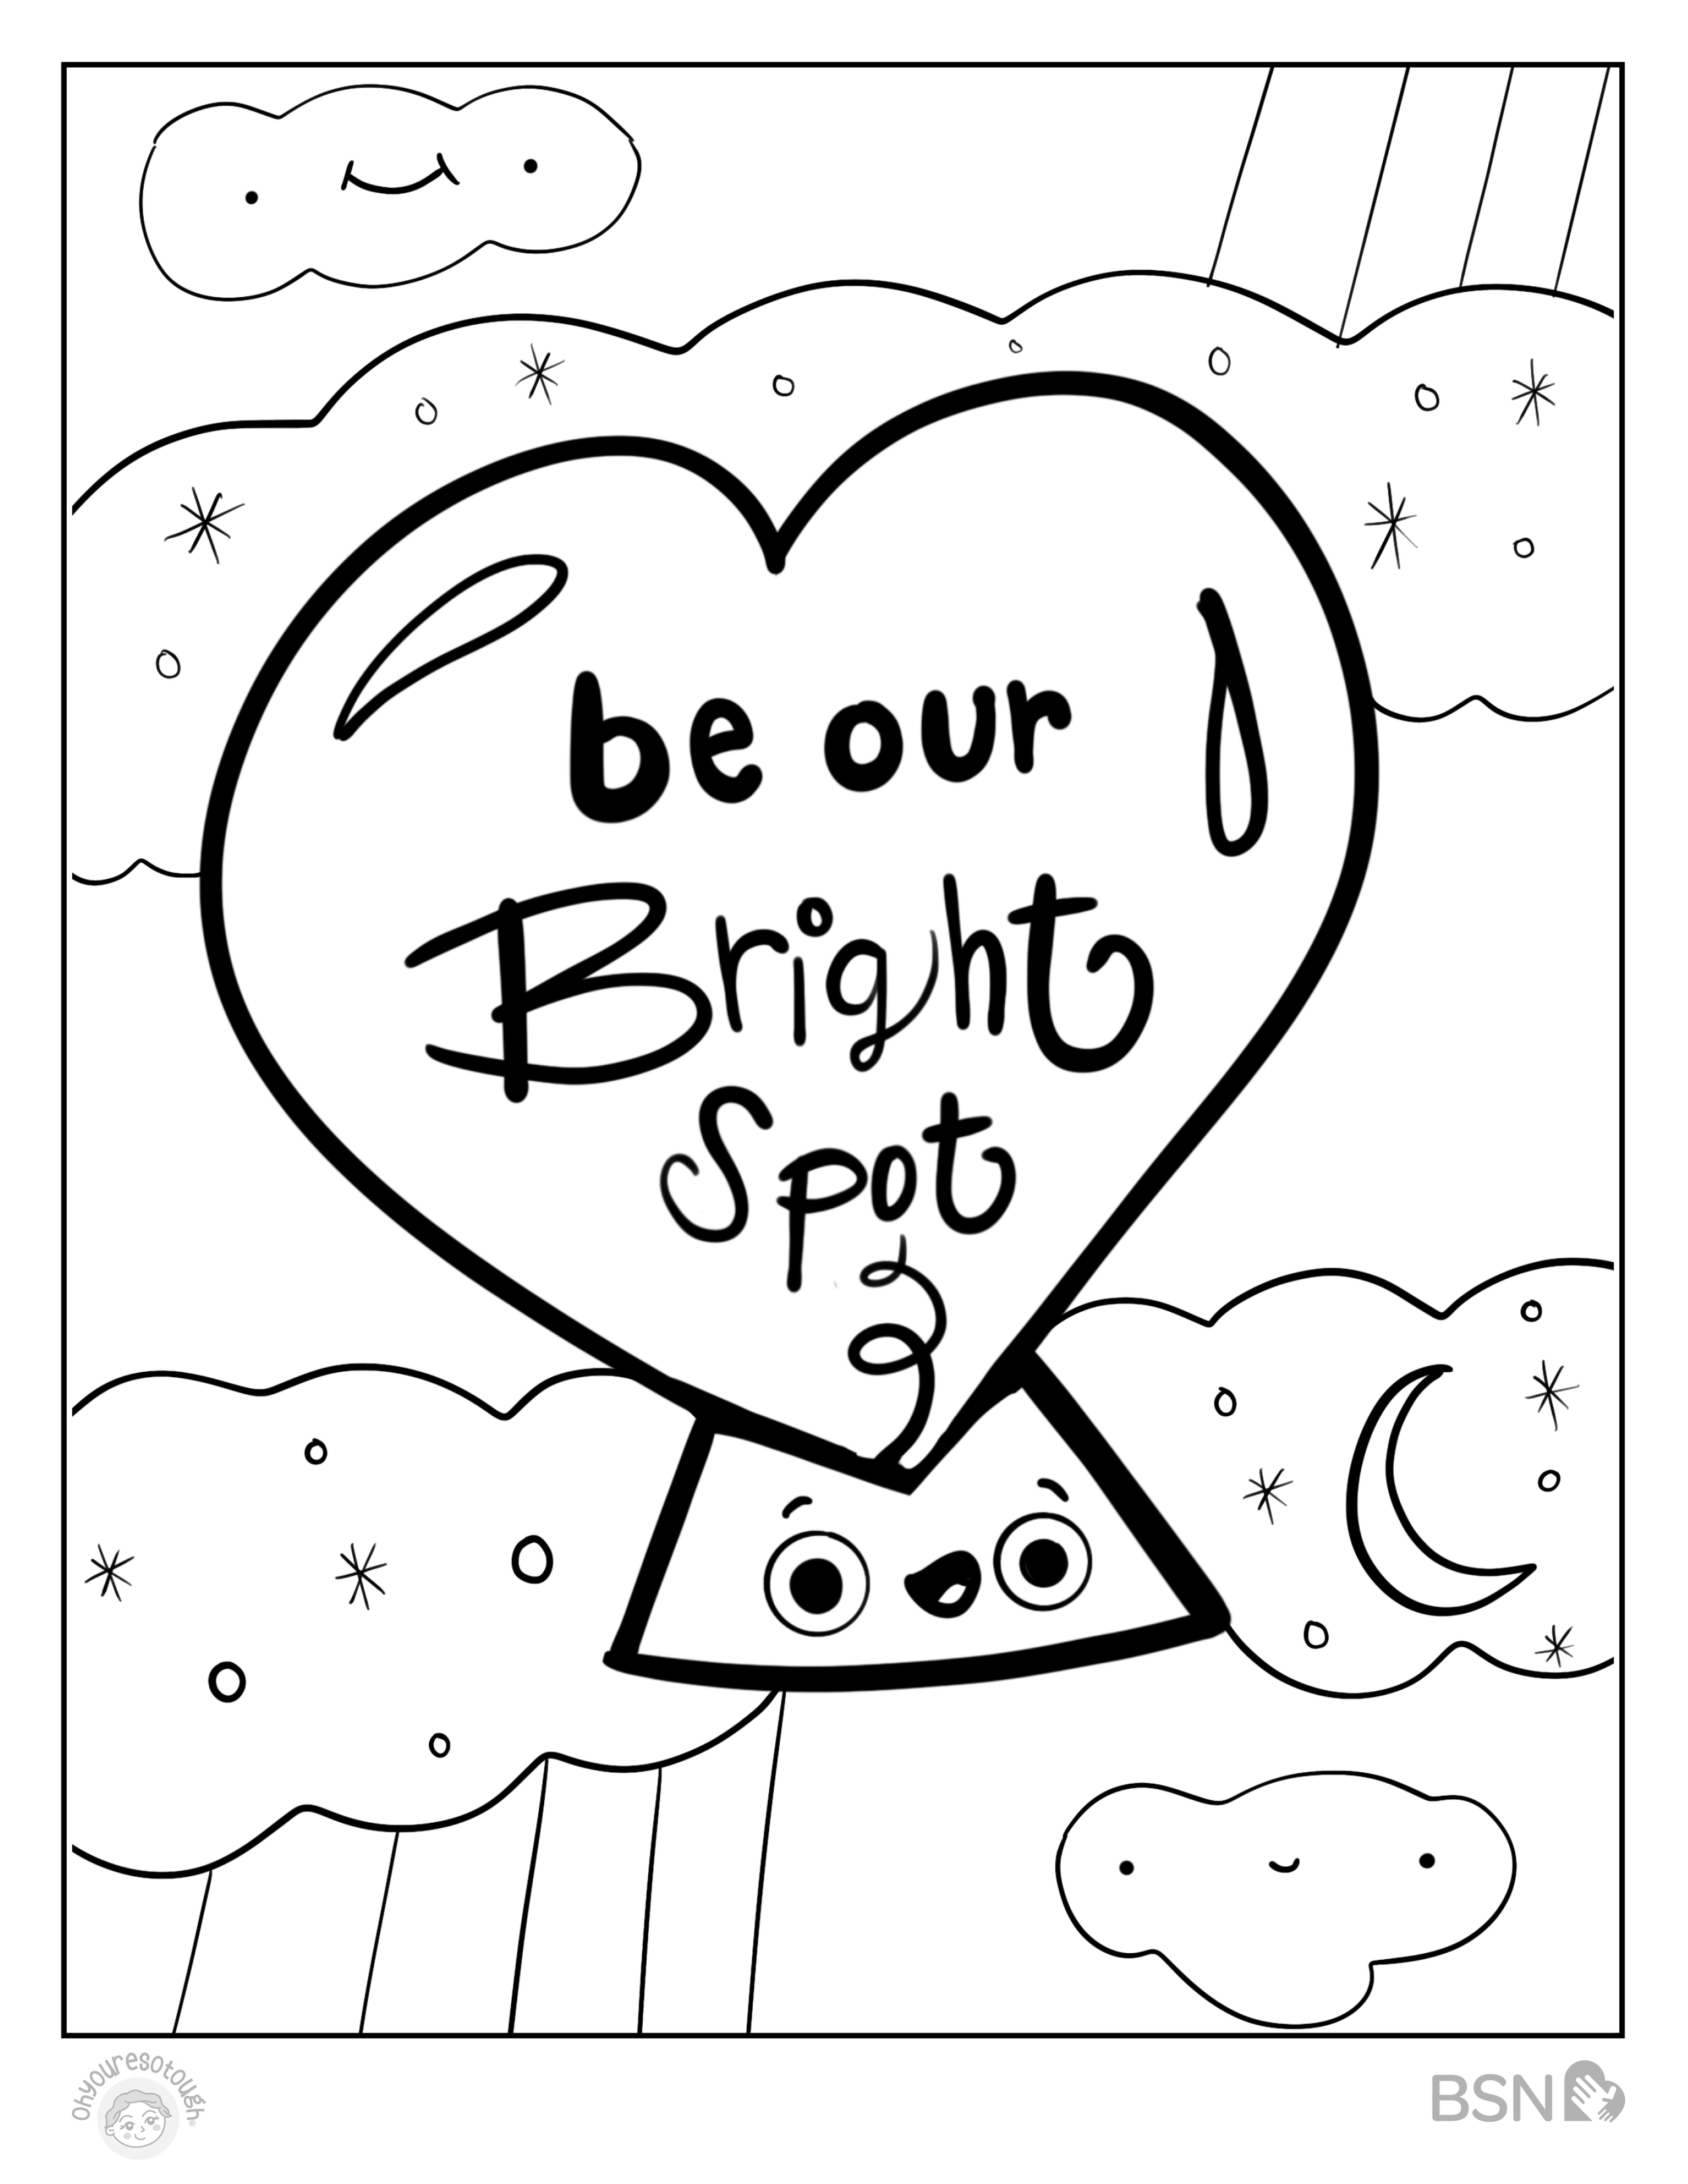 Coloring pages â bright spot network